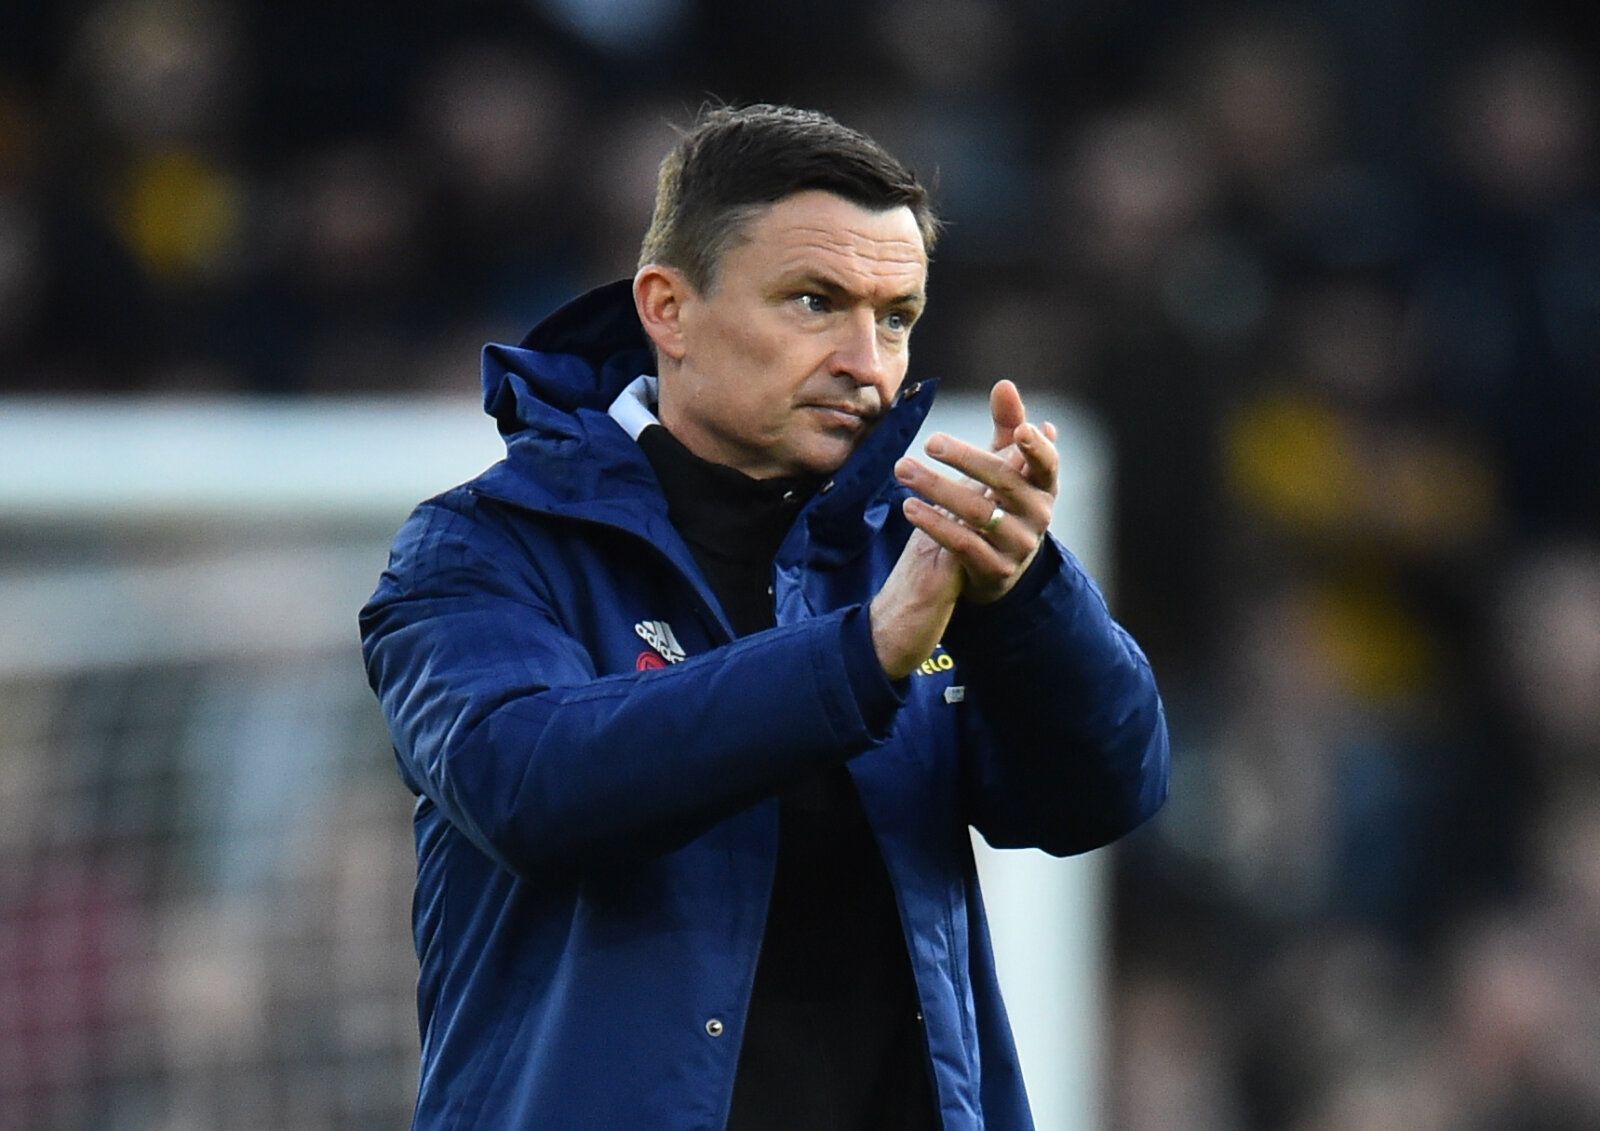 Soccer Football - FA Cup Third Round - Wolverhampton Wanderers v Sheffield United - Molineux Stadium, Wolverhampton, Britain - January 9, 2022 Sheffield United manager Paul Heckingbottom applauds fans after the match REUTERS/Peter Powell